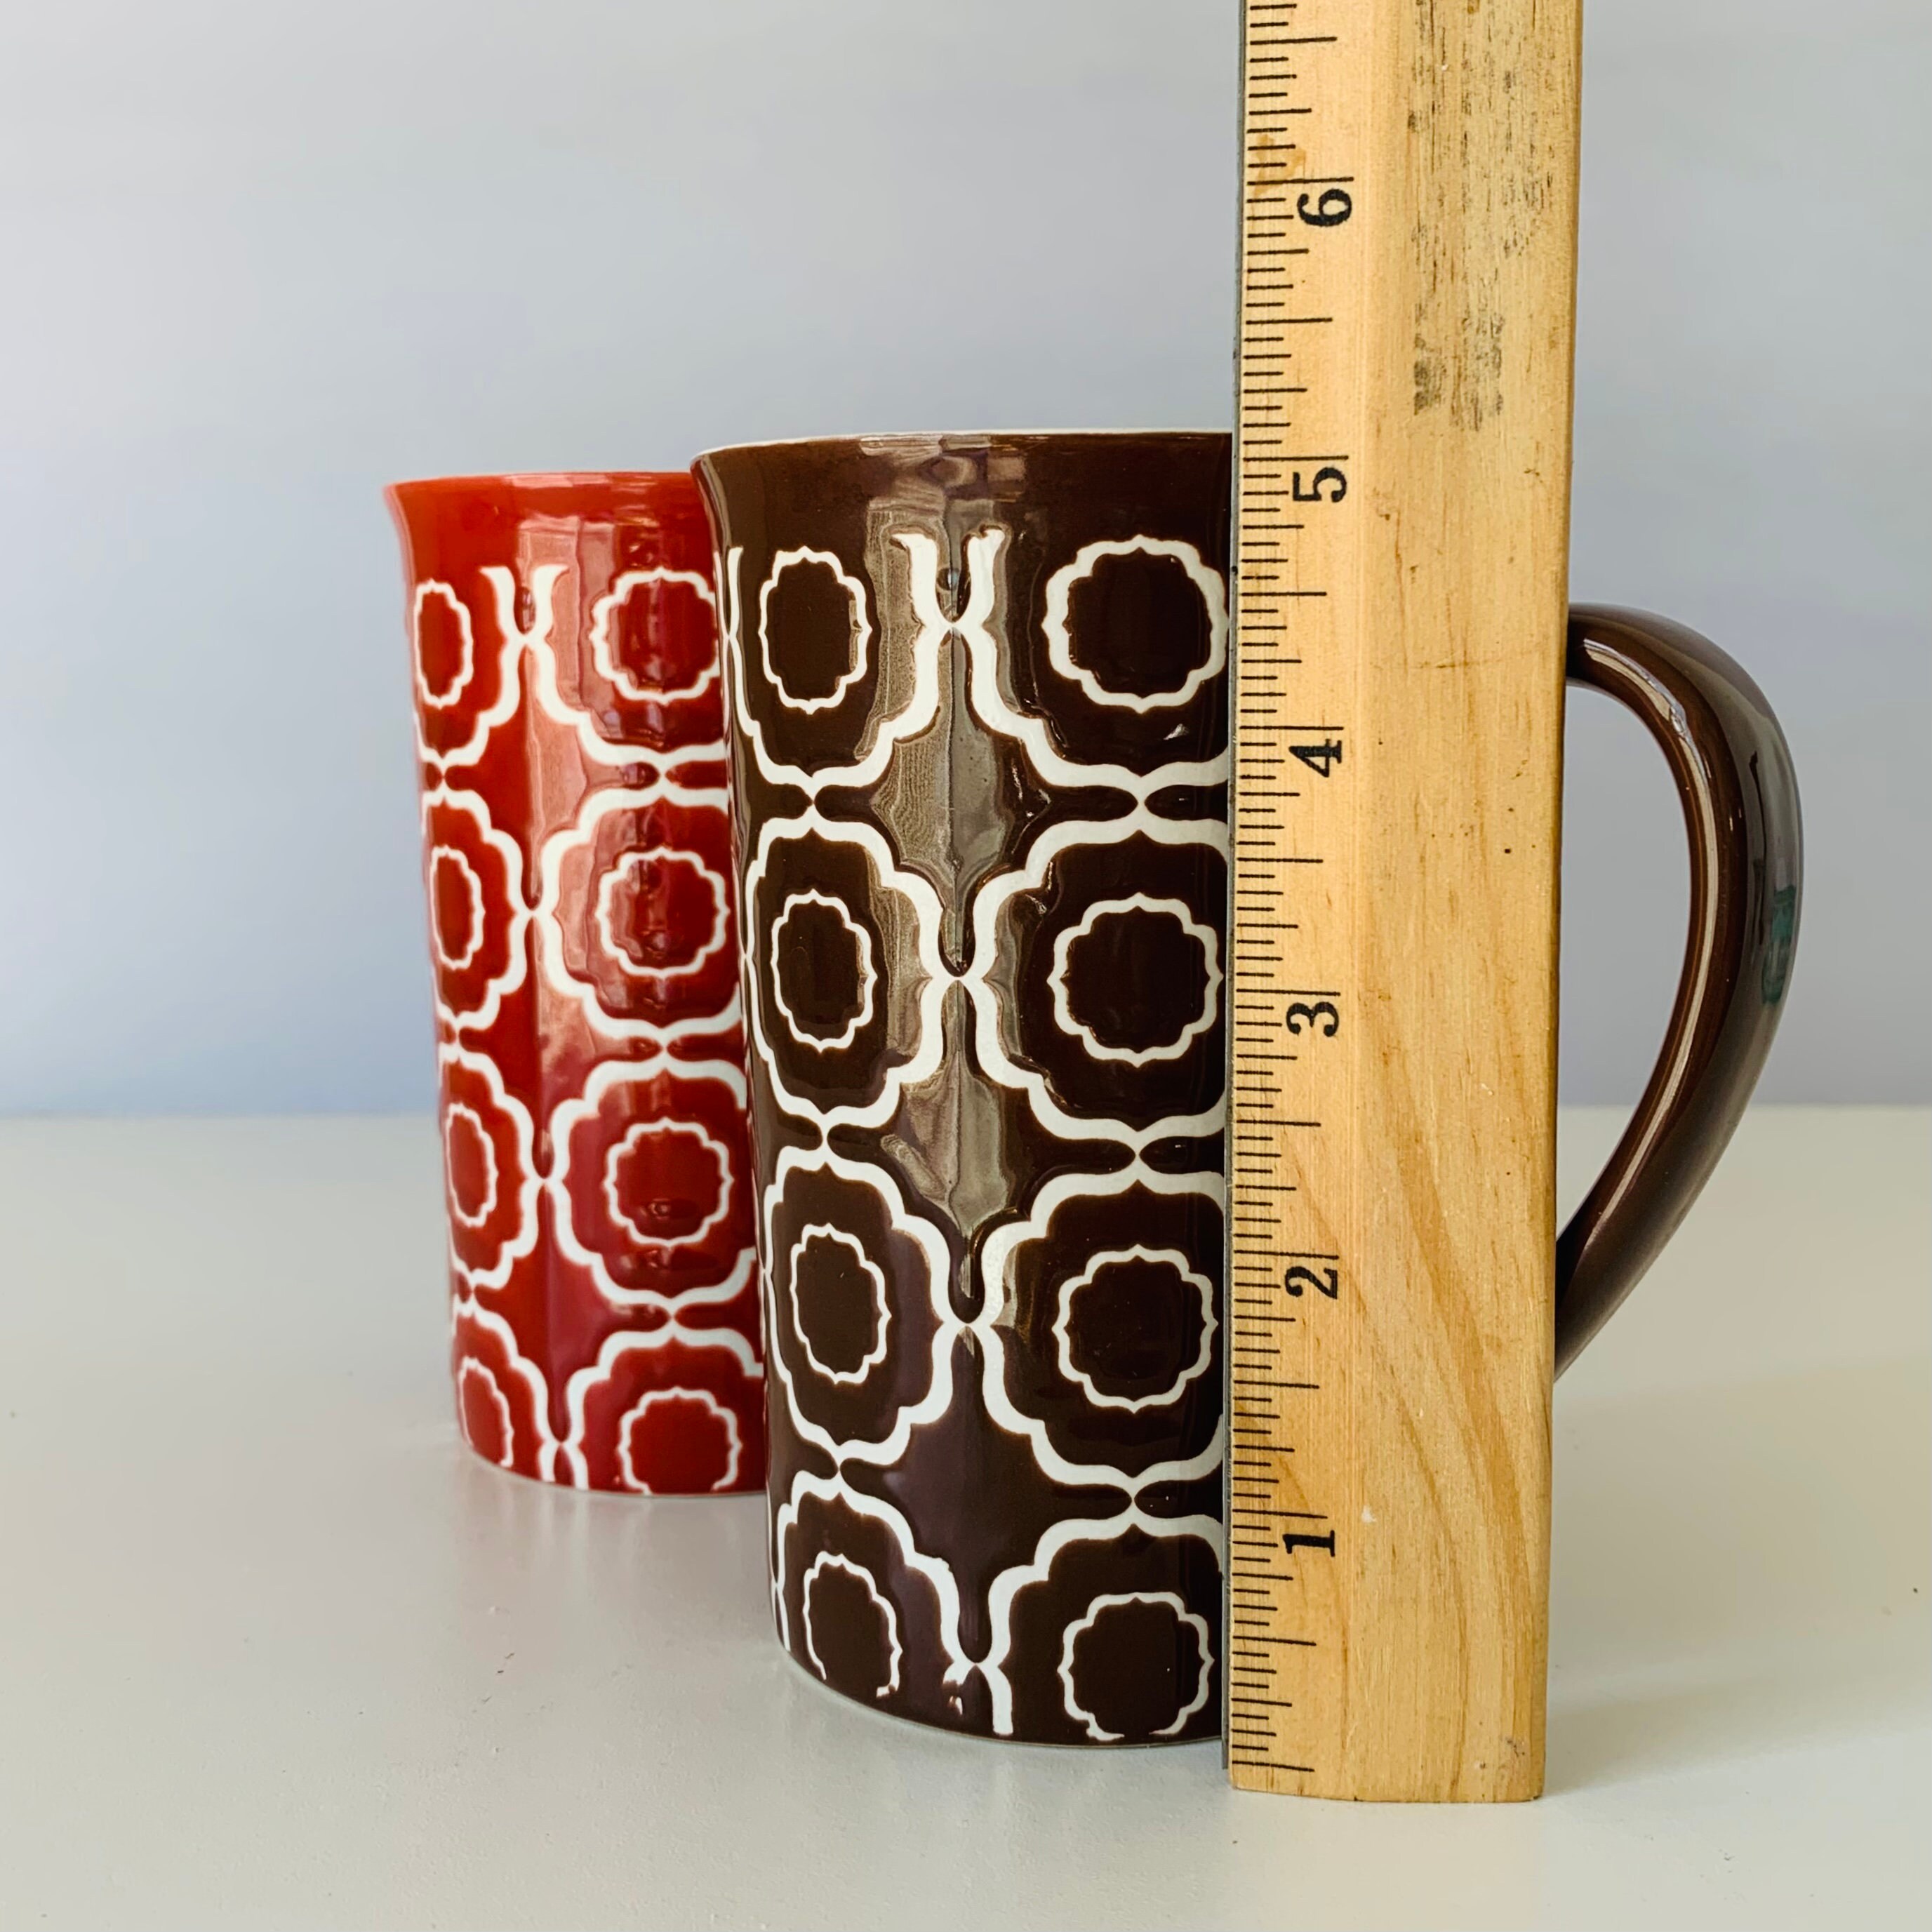 TABLETOPS MODERN TILE Embossed Ceramic Mugs, Brown Red Tall Latte Coffee  Cups, 2 Tabletop Avenue Modern Tile Handcrafted 5 Tall Cup Mug 